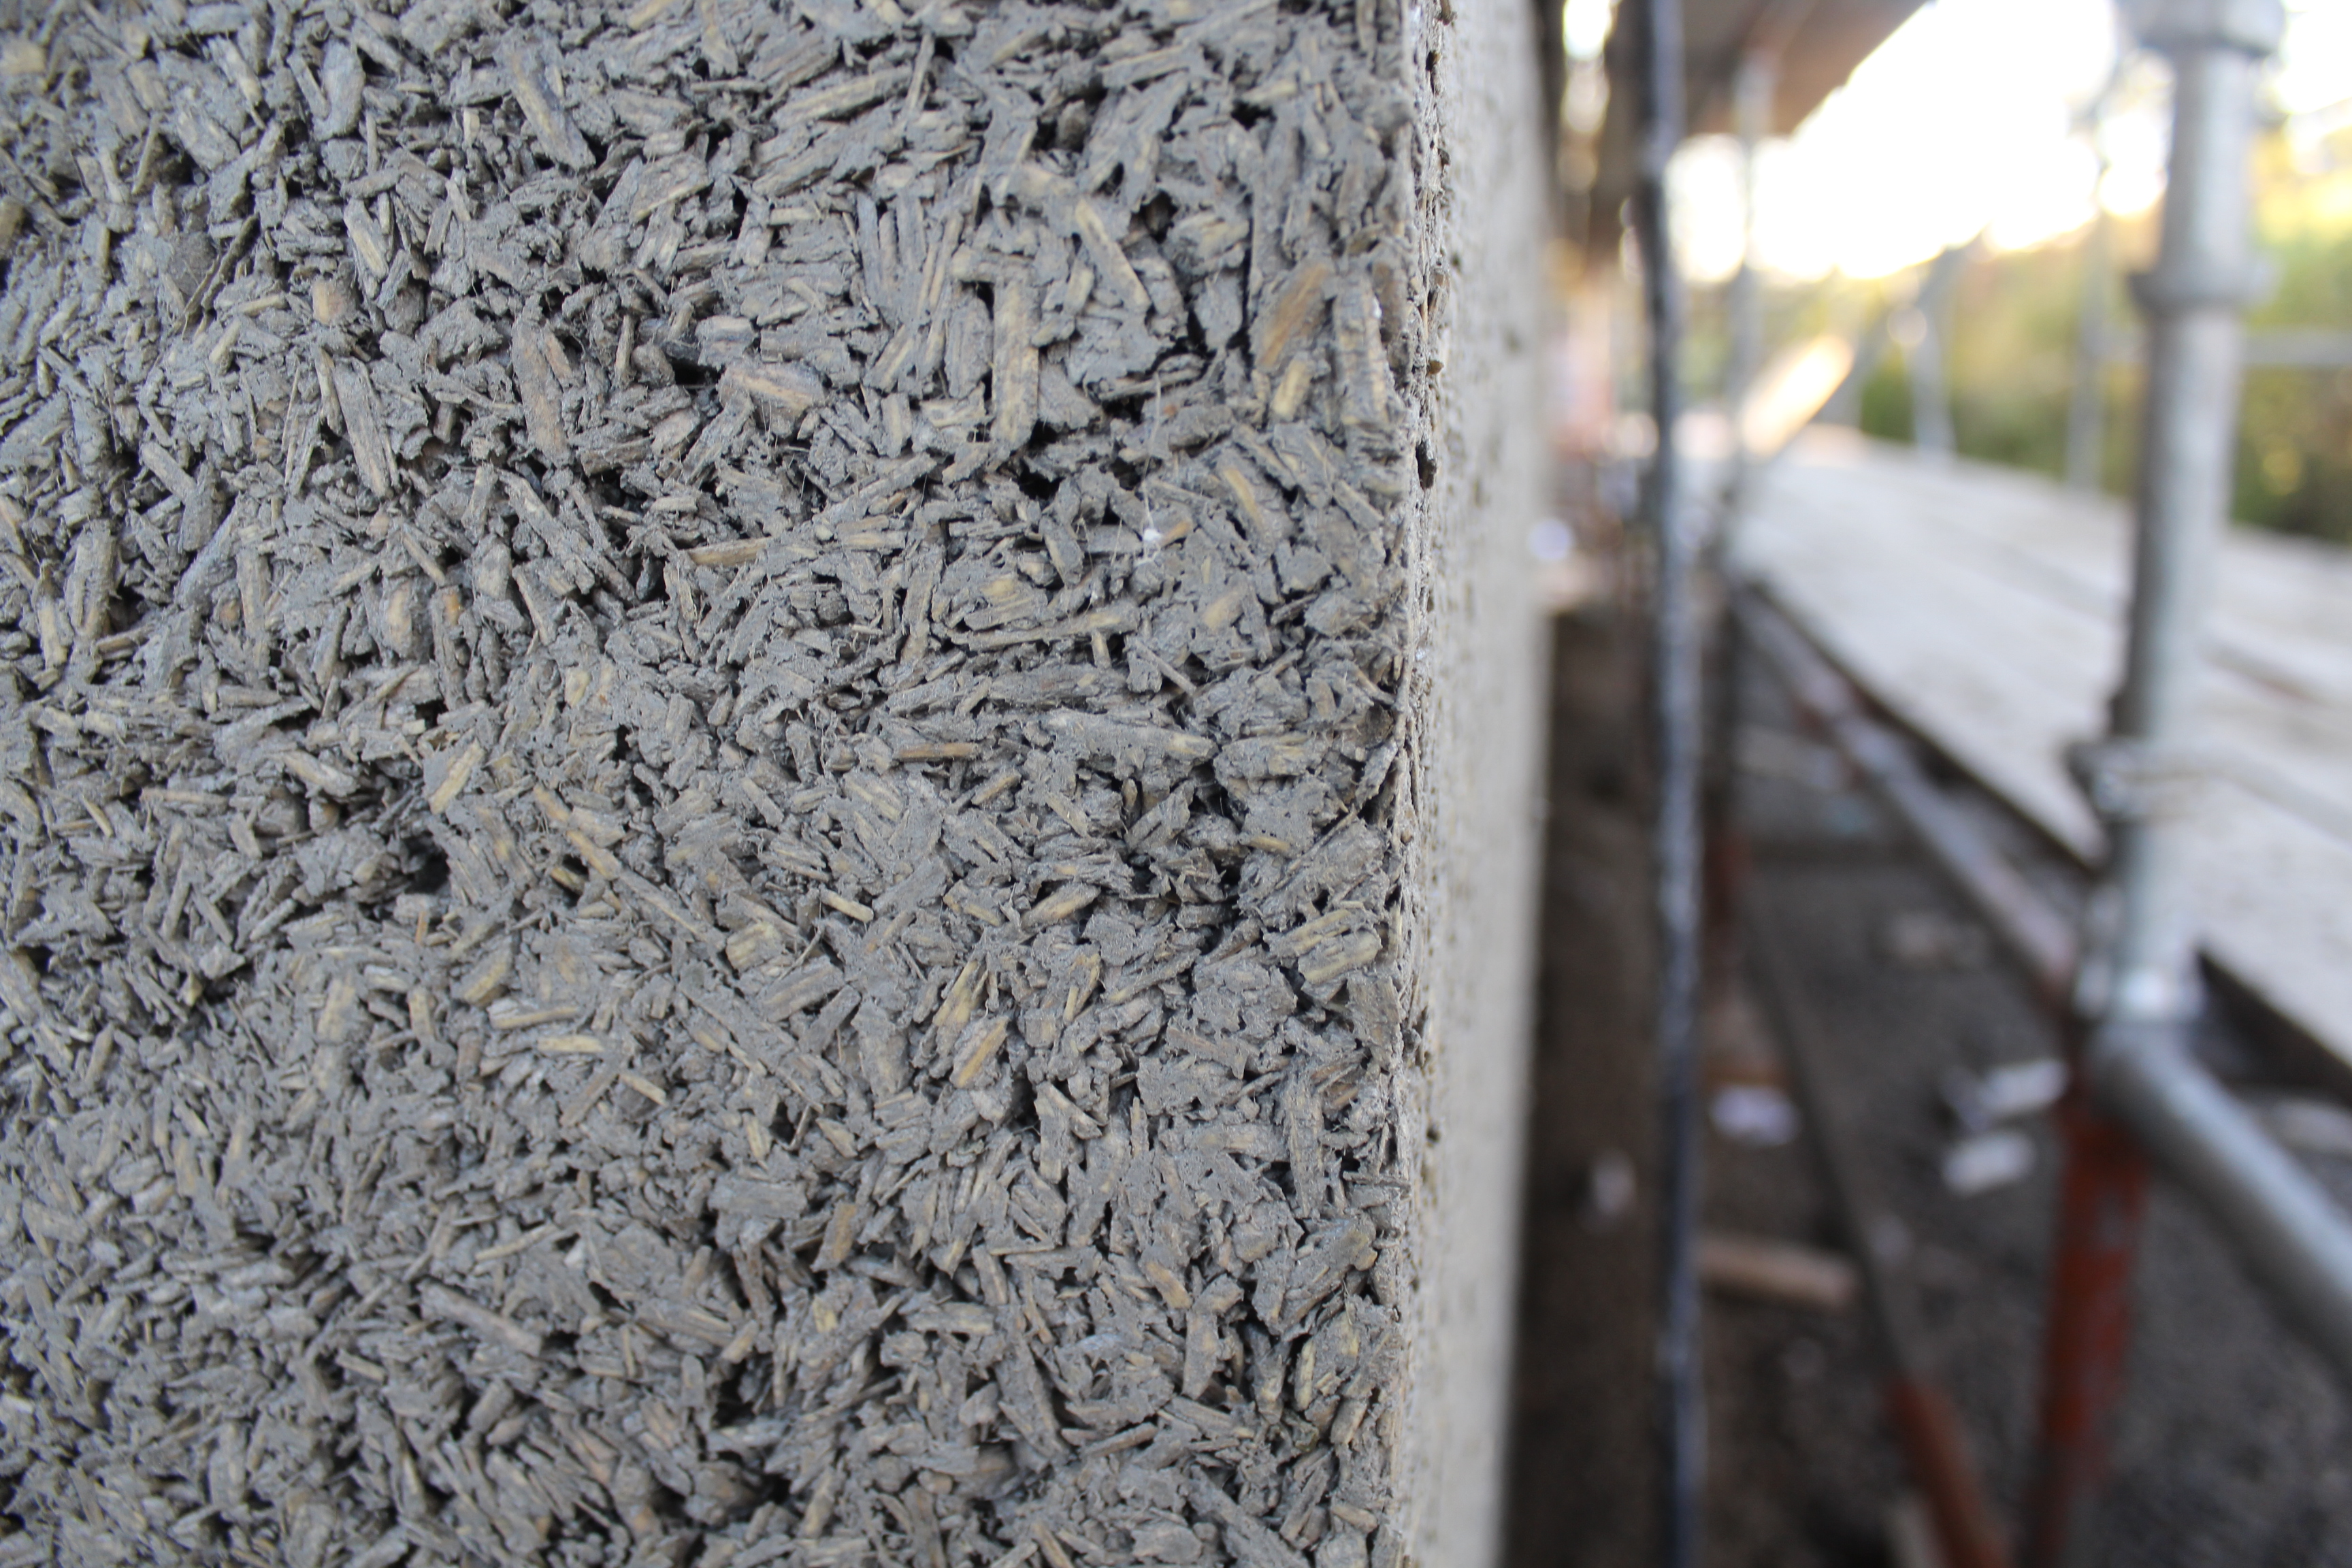 close up of cast on site hempcrete showing the mixture of hemp shiv and hydraulic lime binder